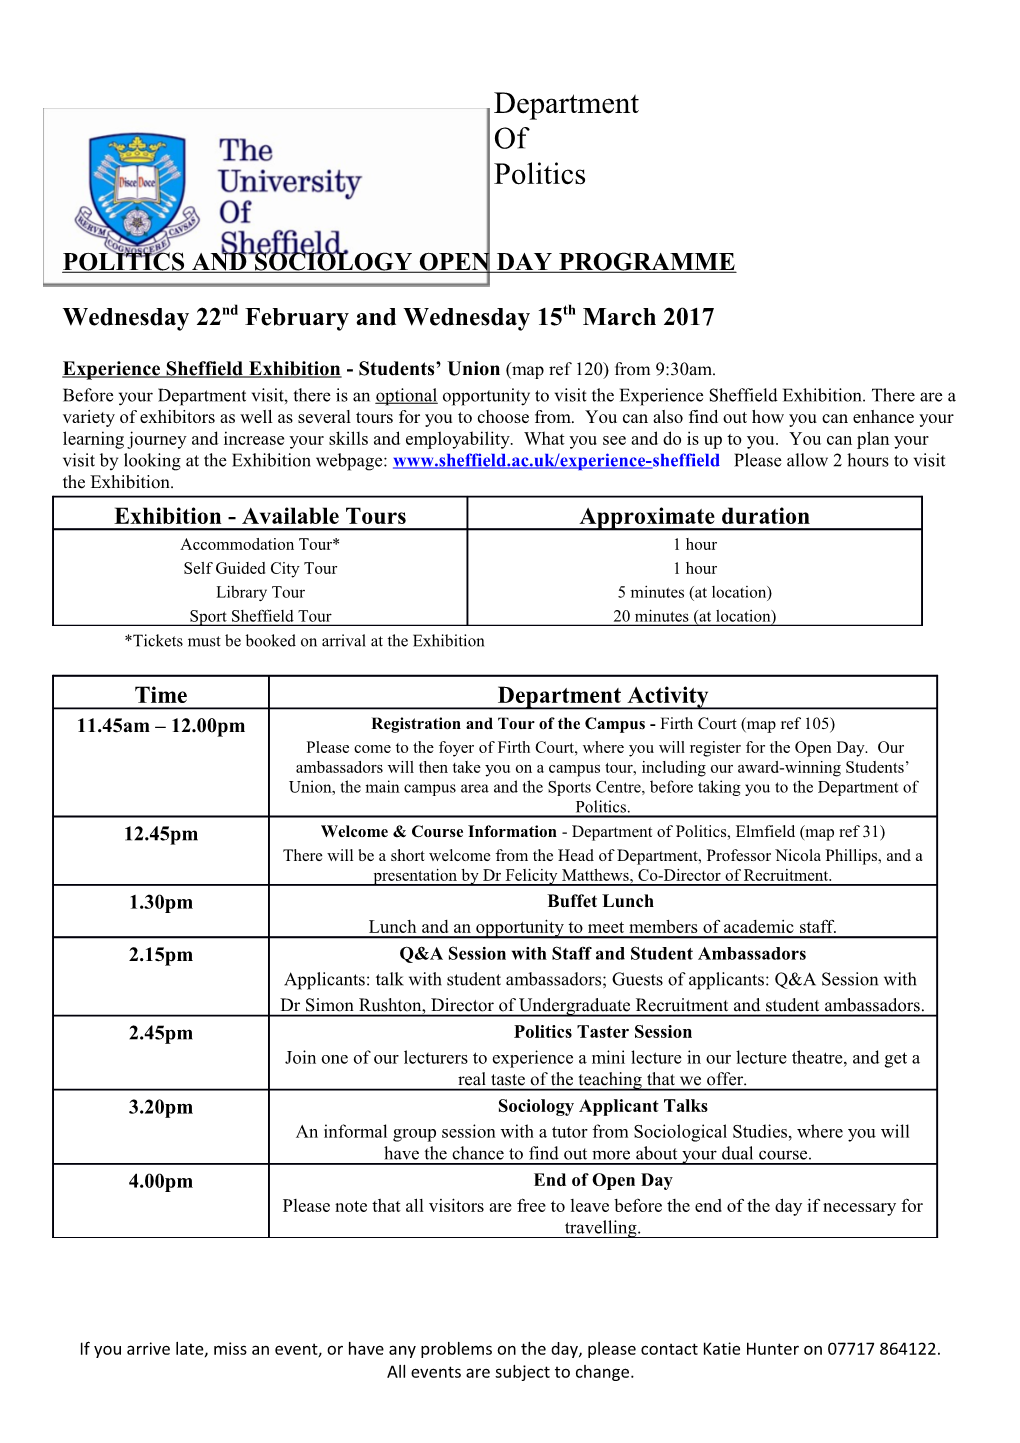 Politics and Sociology Open Day Programme